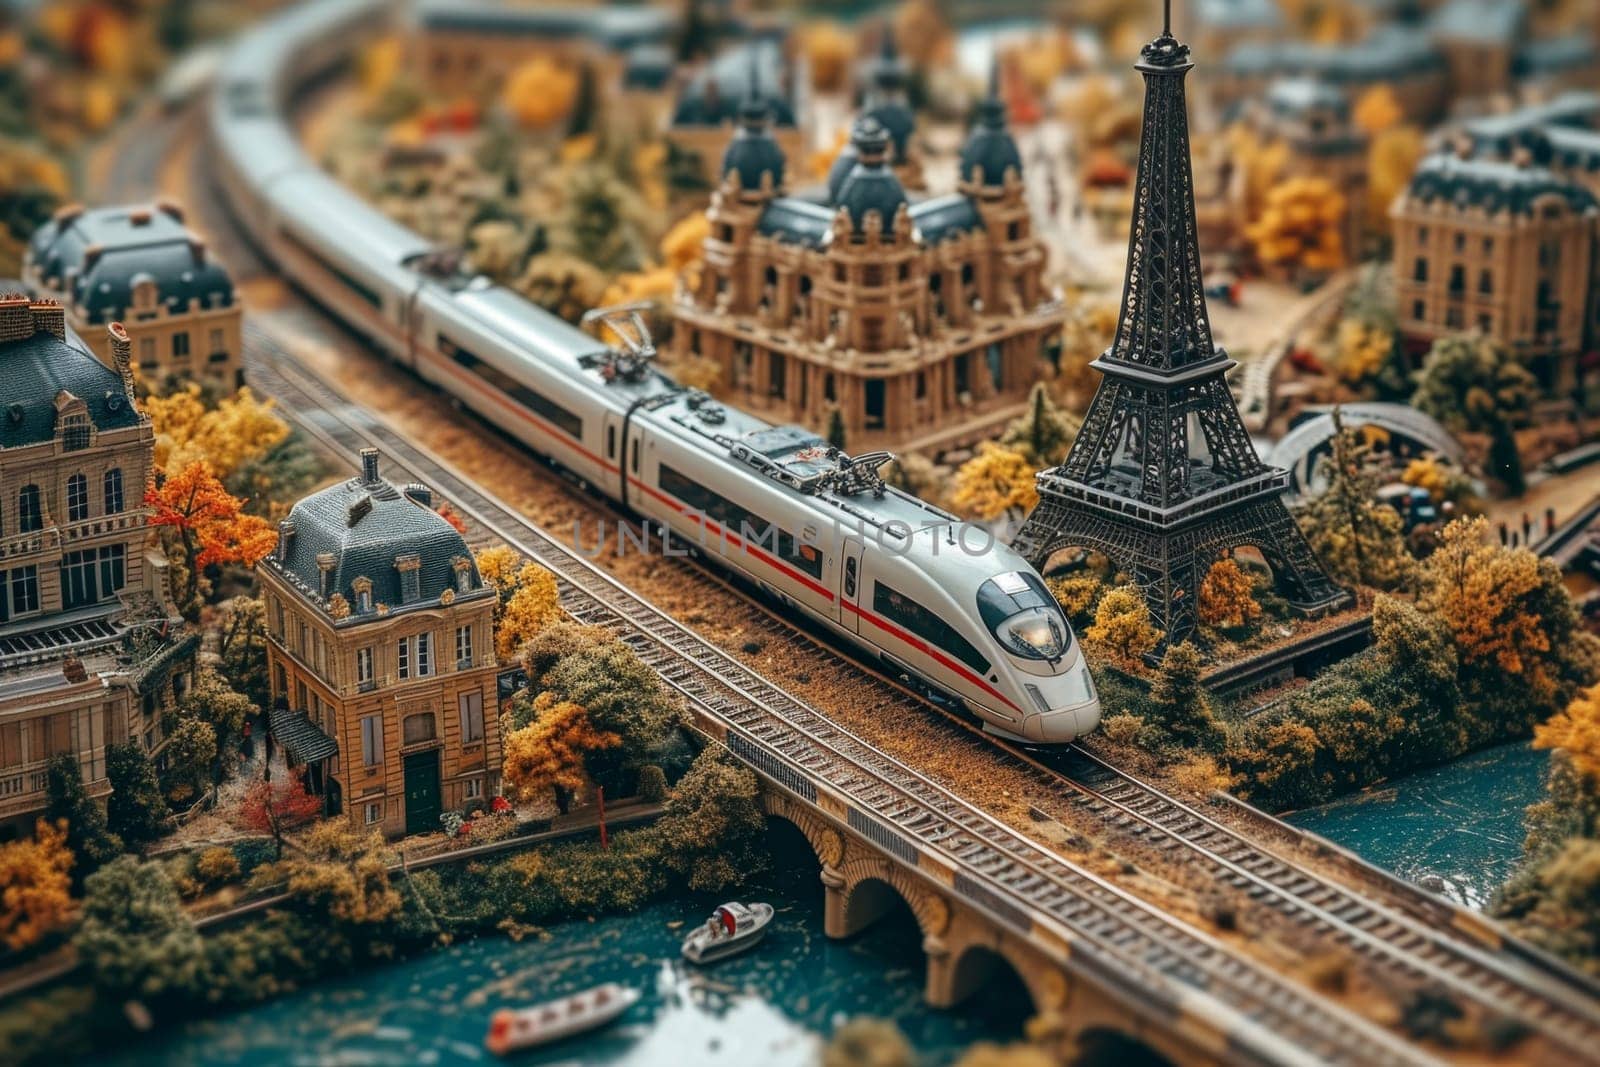 A high-speed railway locomotive is on its way through the city. 3d illustration by Lobachad